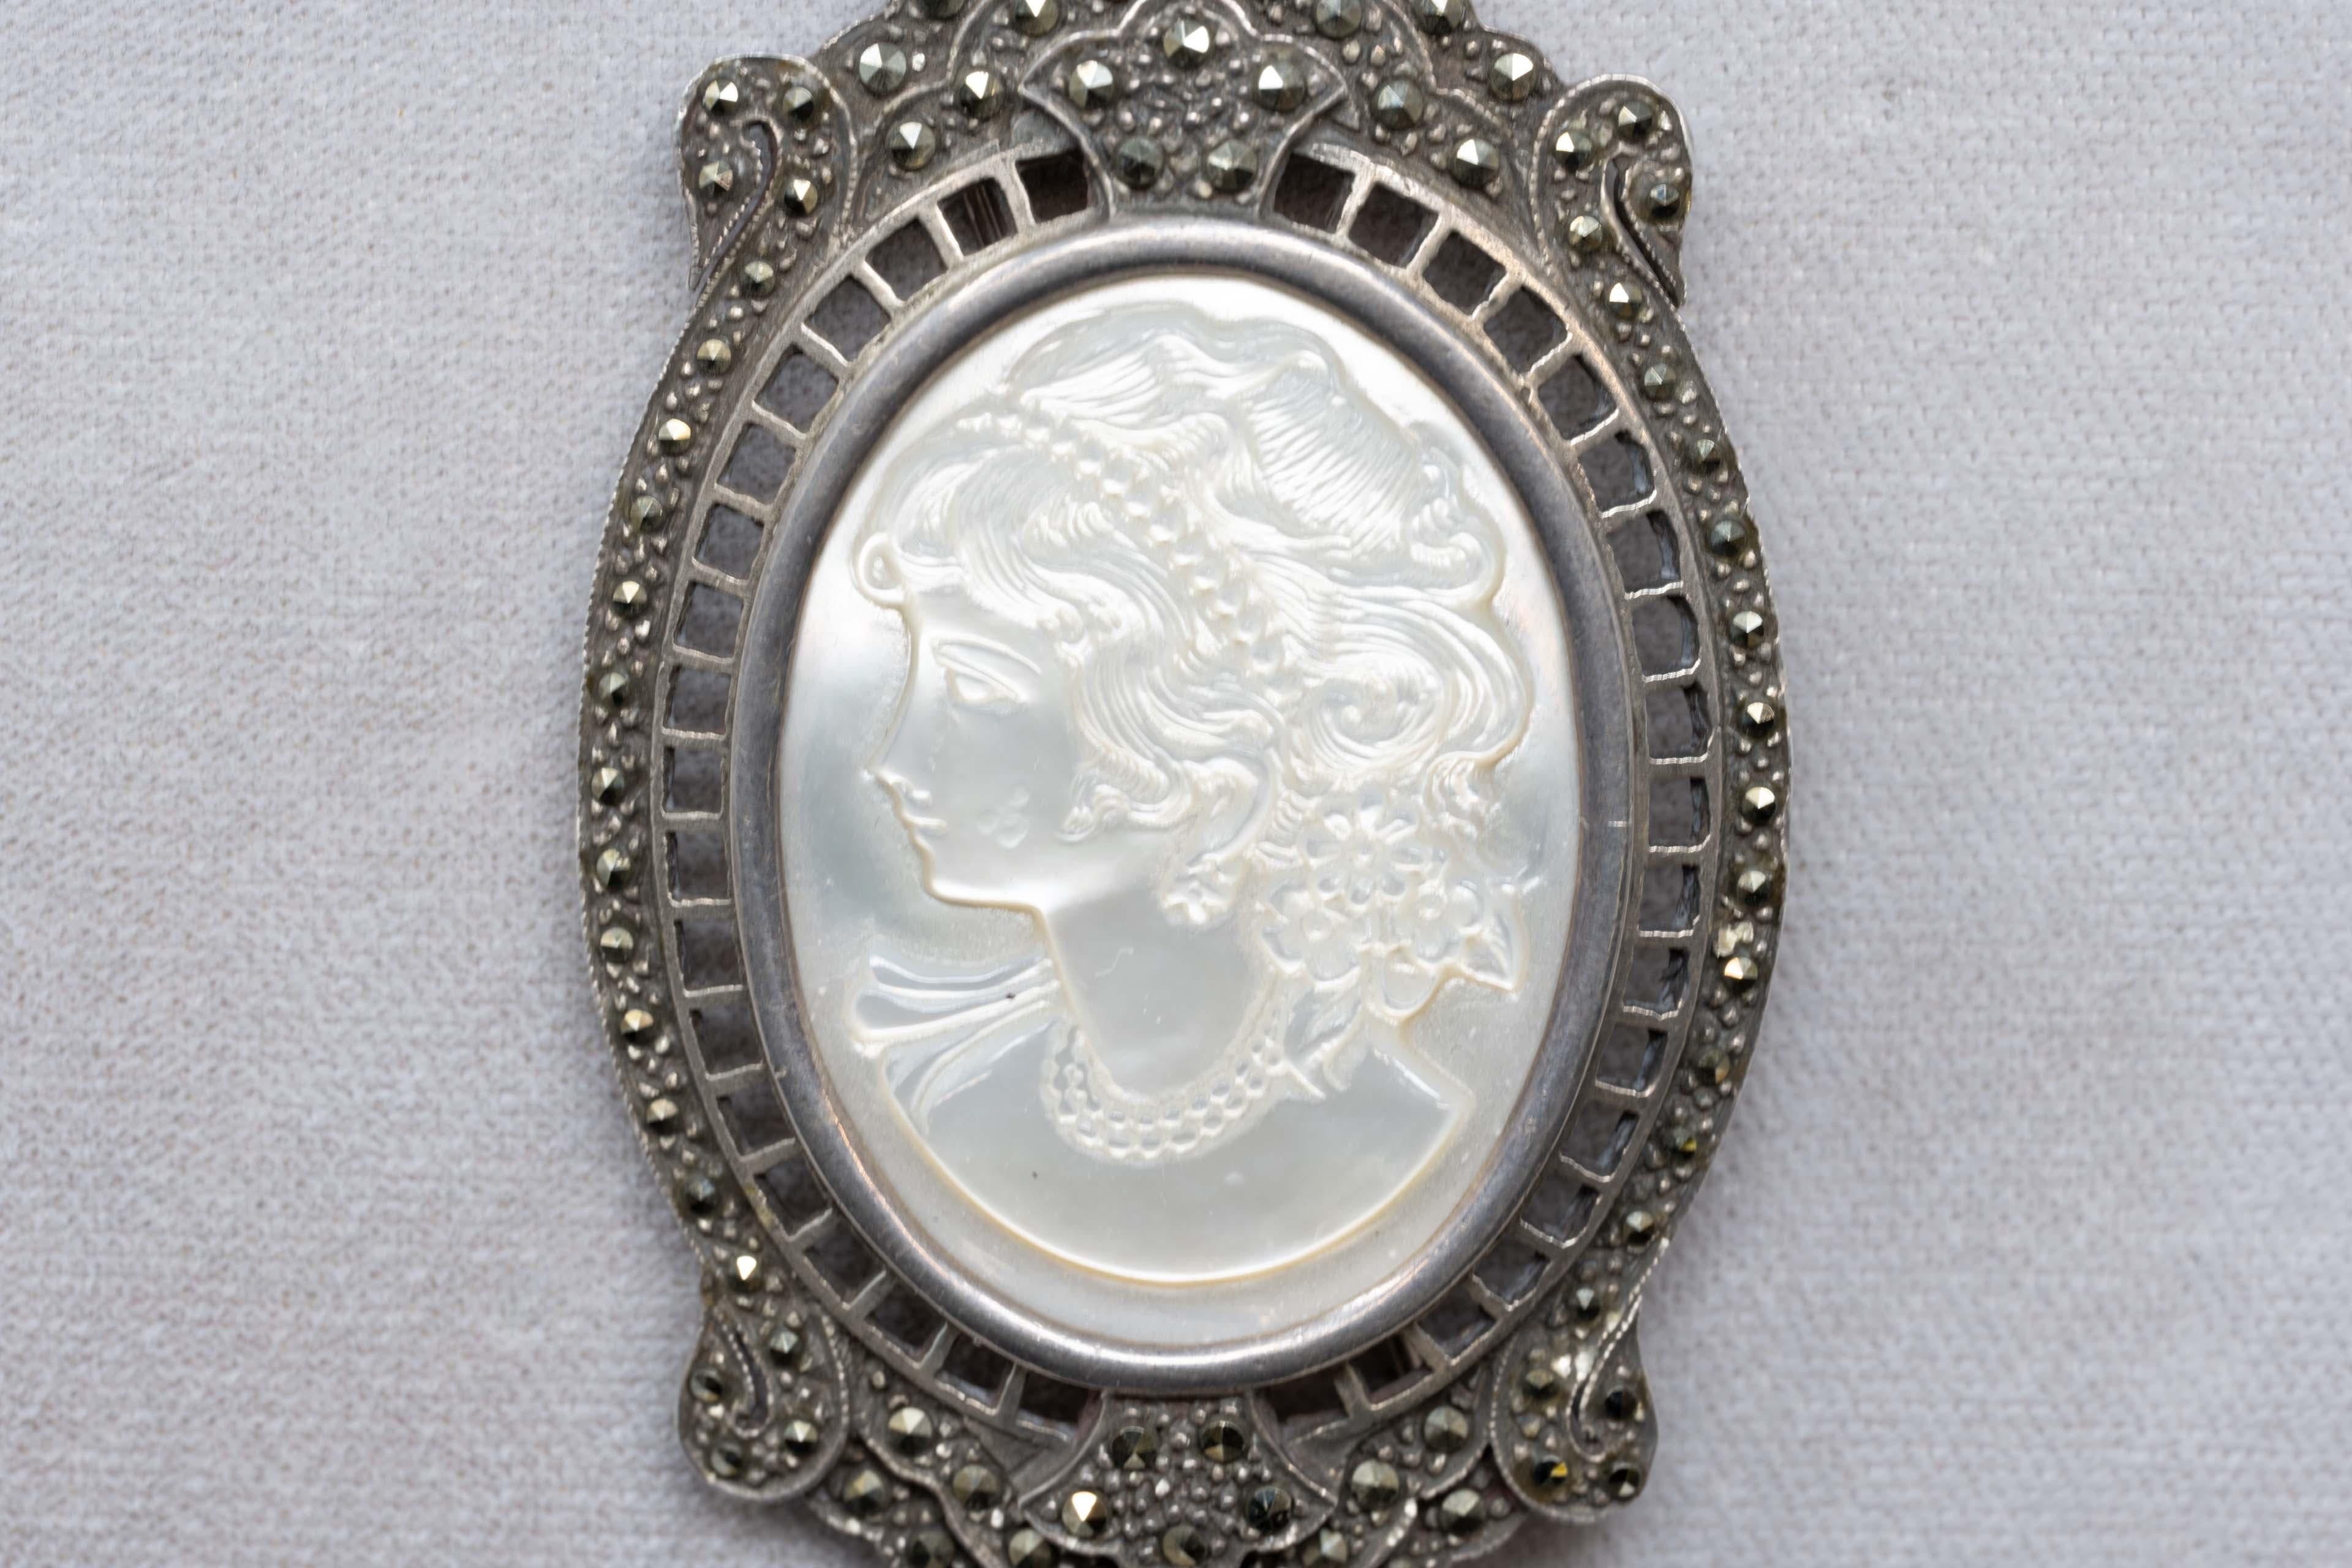 Victorian sterling silver brooch pendant with marcasite and carved lady's figure. Stamped 925 on the back, measures 3 inches long x 1 3/4 inches wide. The carving measures 1 1/2 inches x 1 1/3 inches, very good condition. Made in Canada late 19th